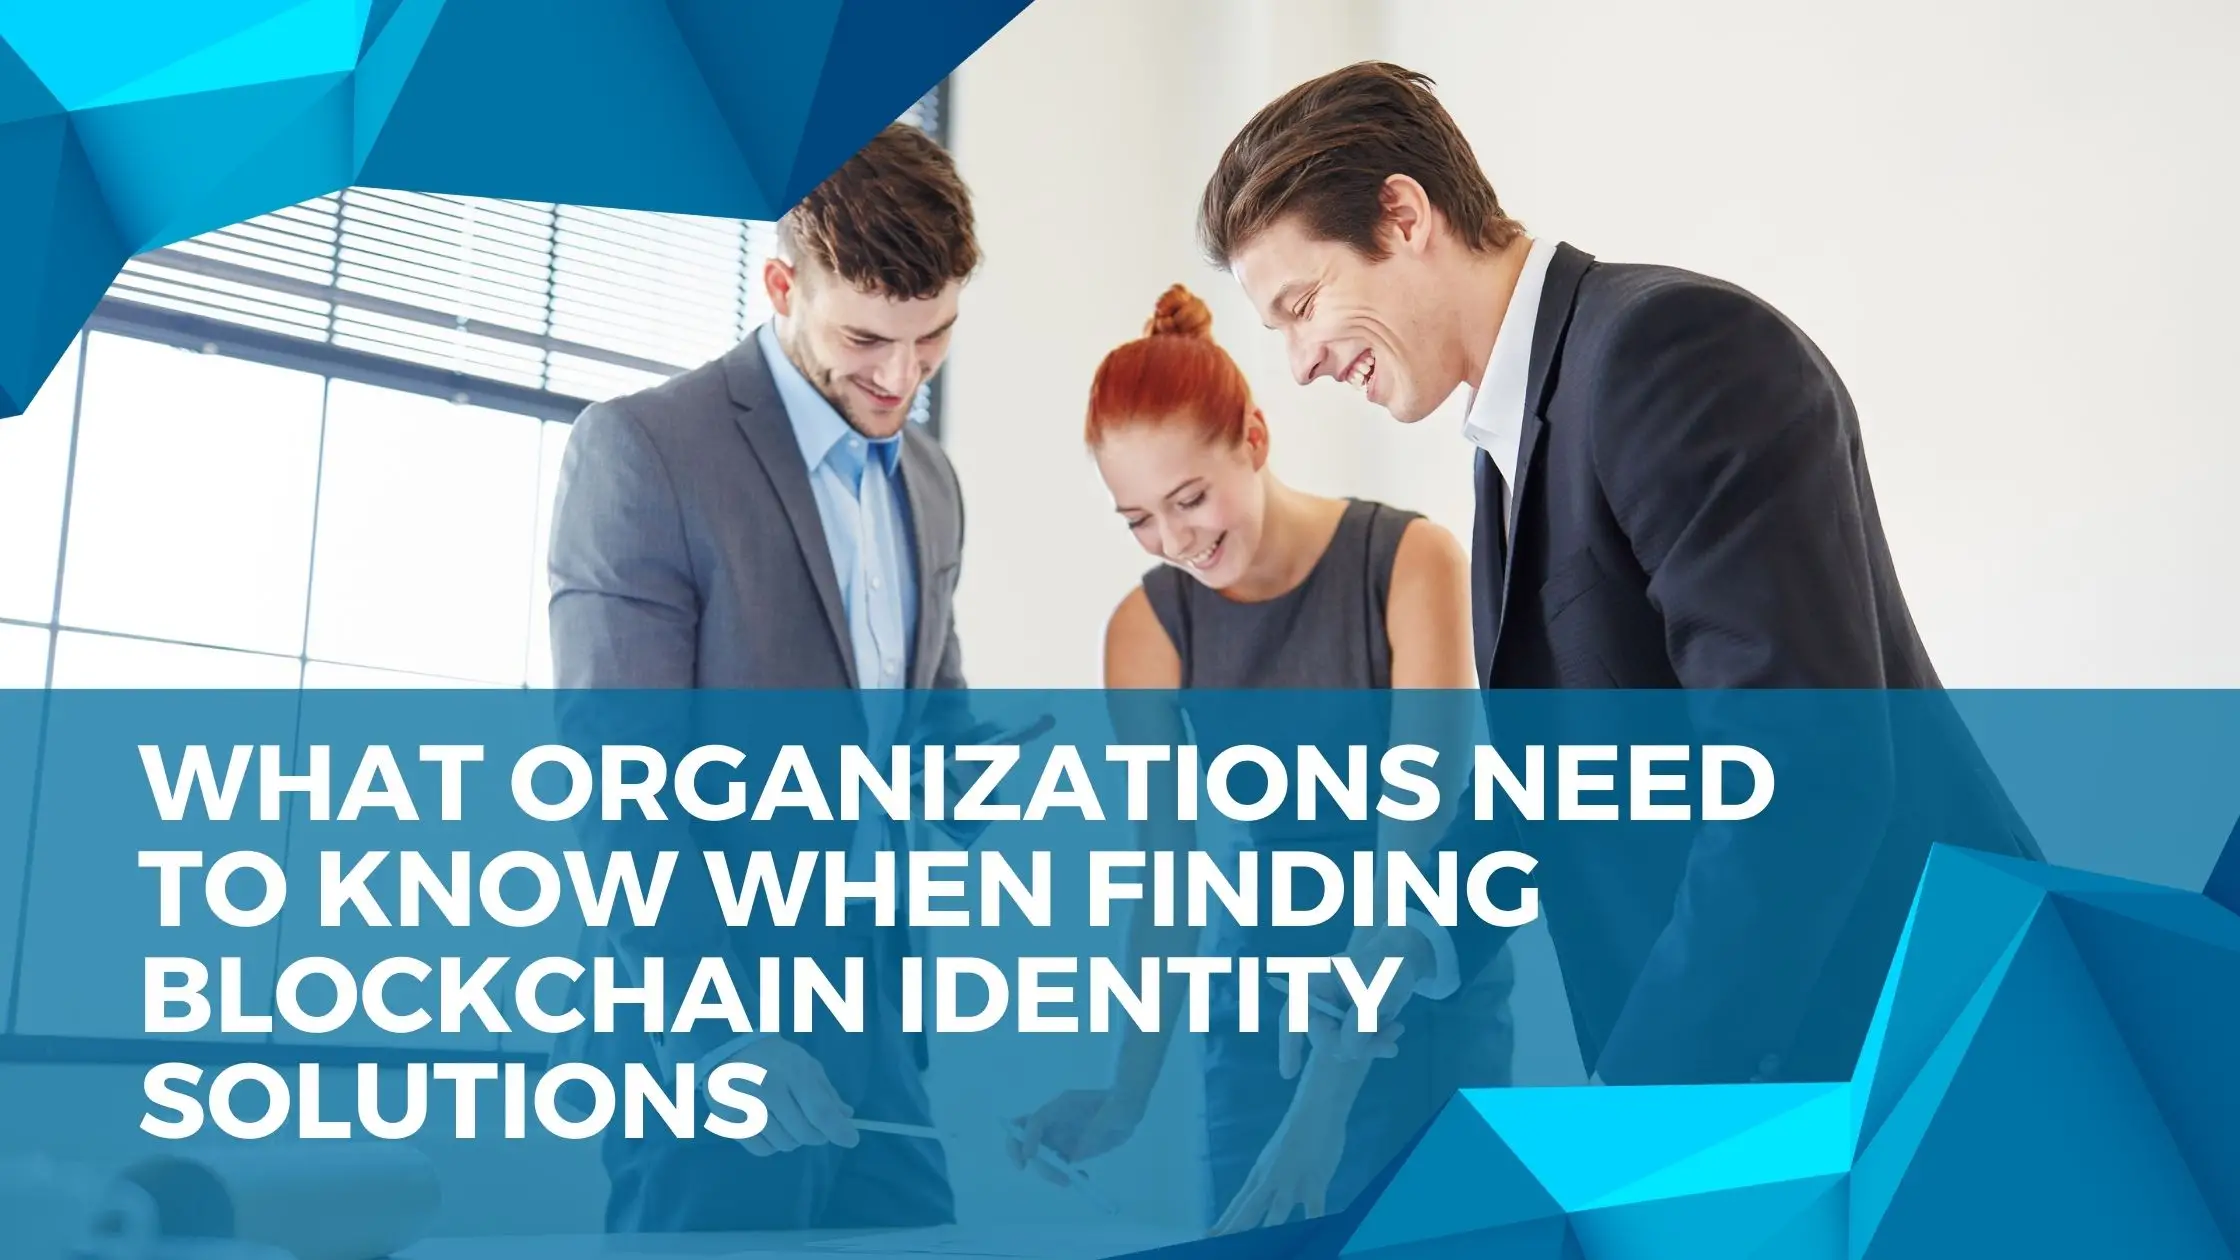 What organizations need to know when finding blockchain identity solutions